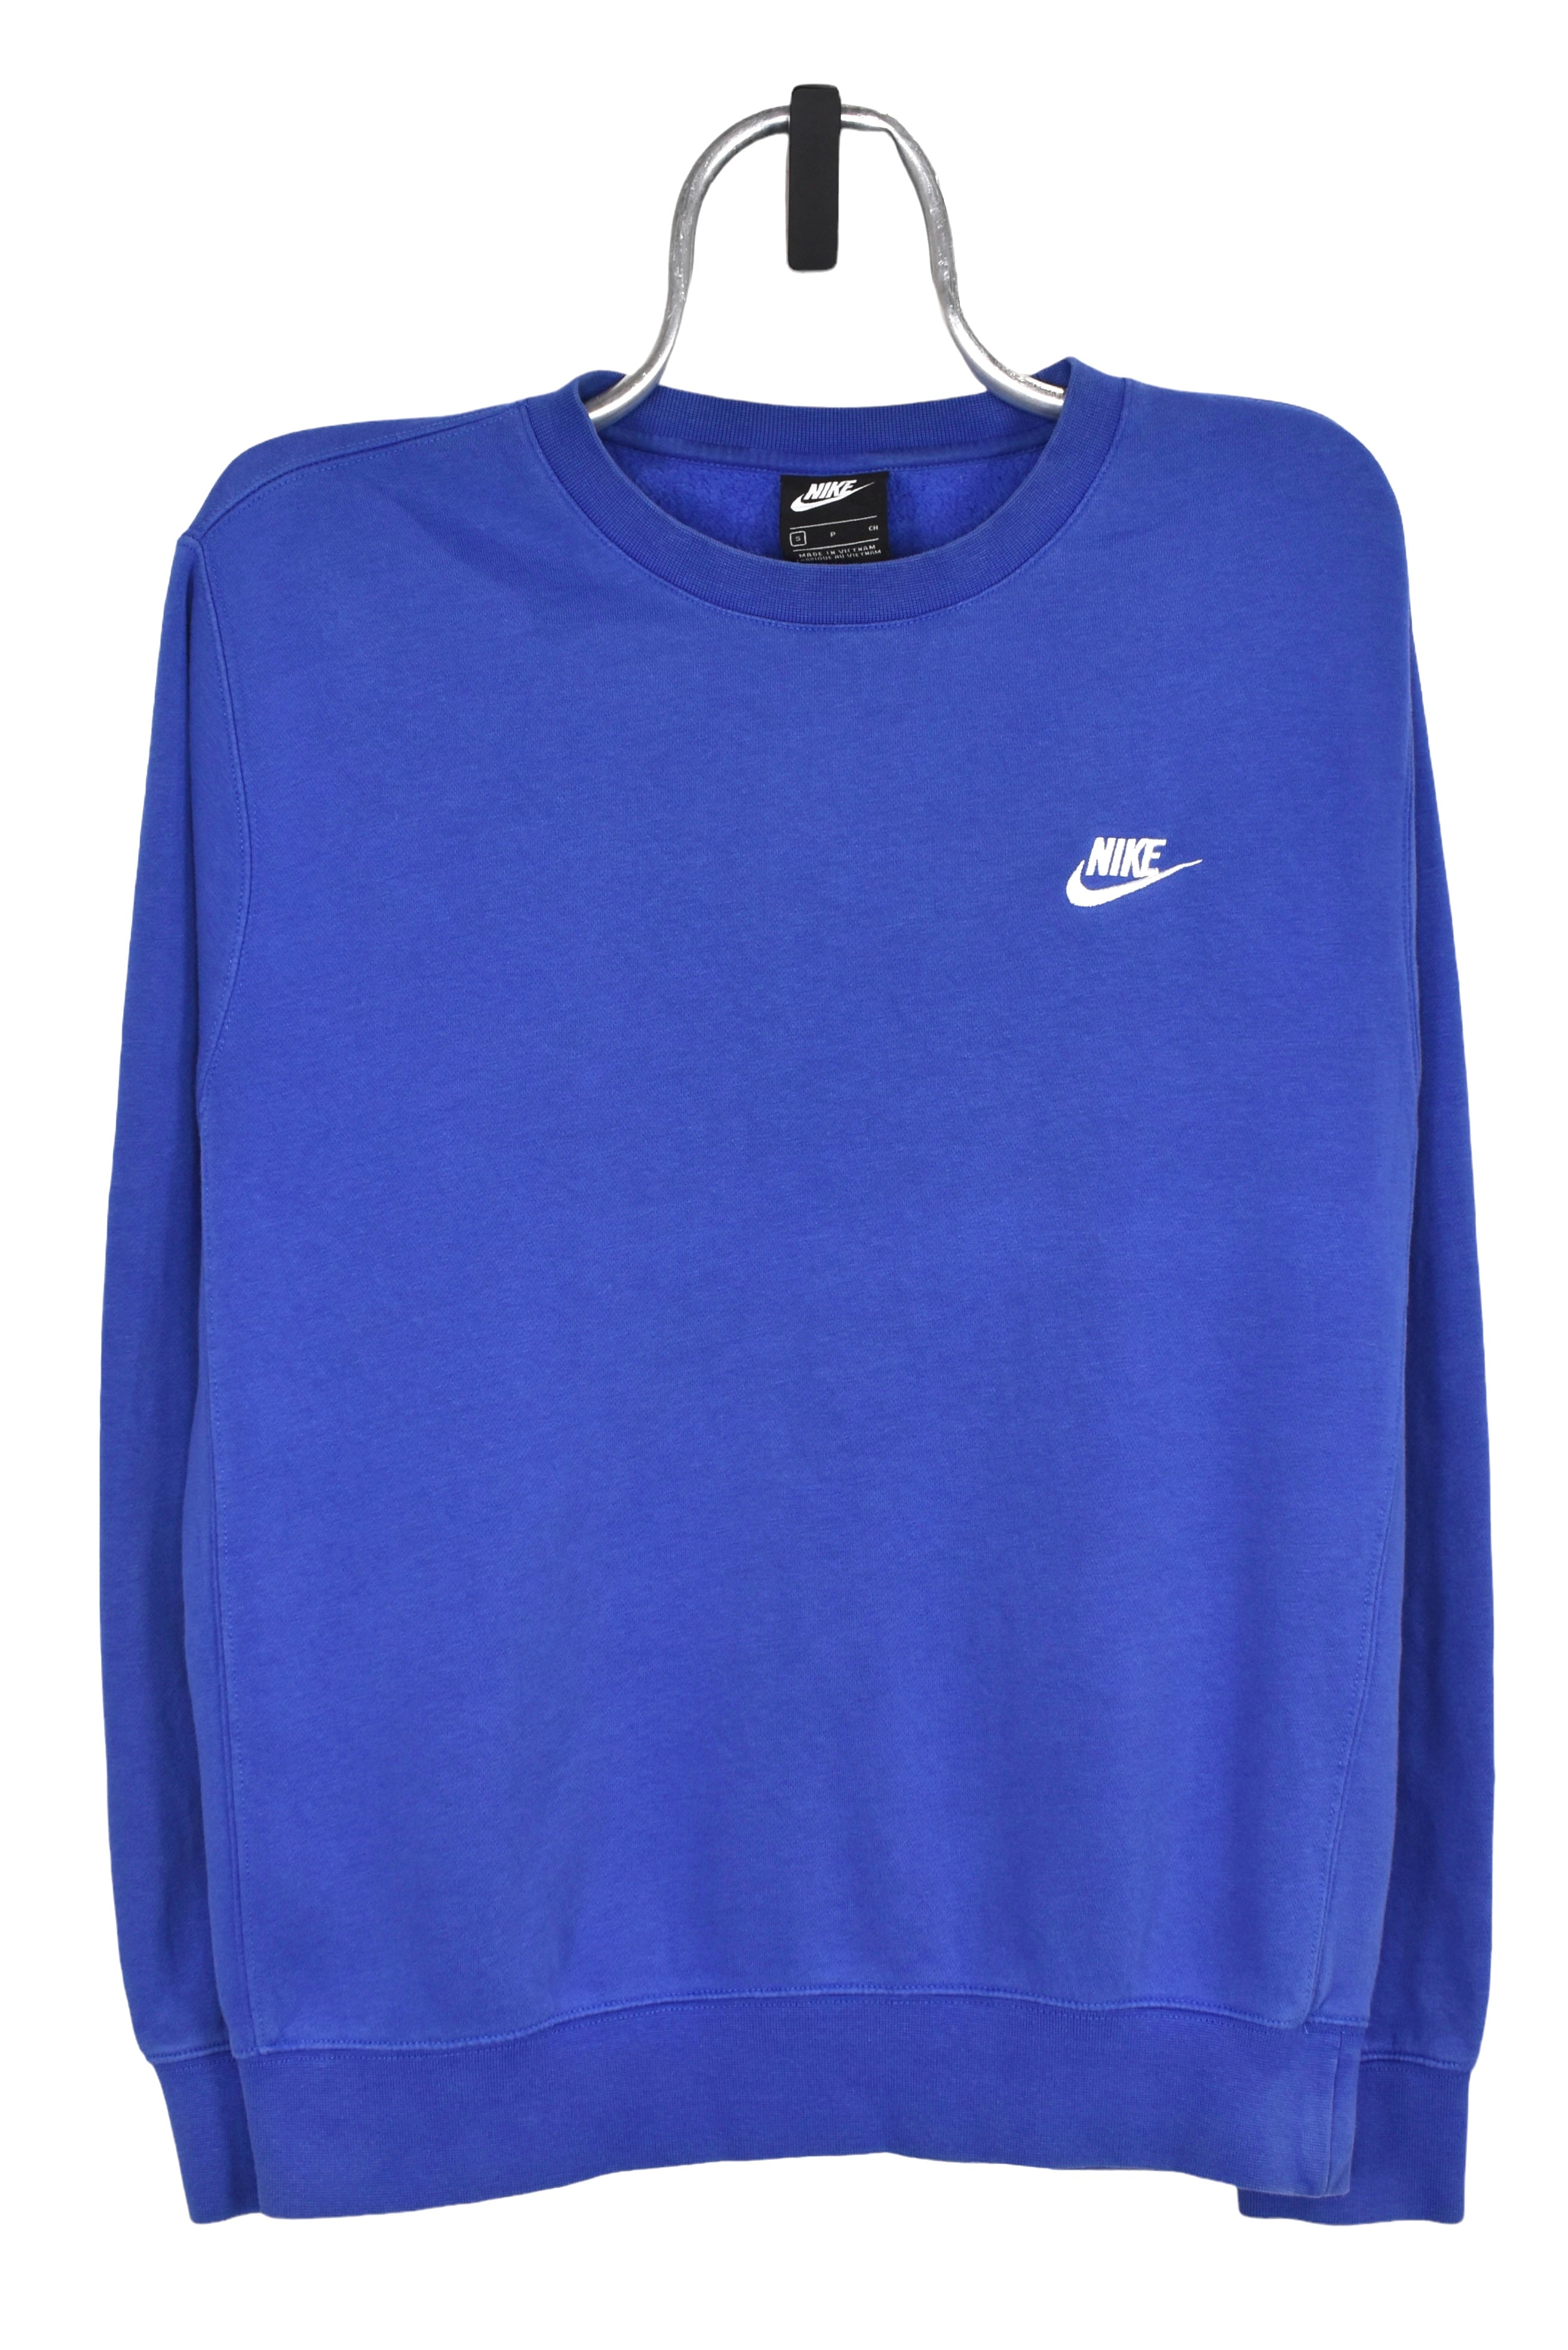 Nike Sport Clothing. Sweaters & pants for men and women. - Netherlands, New  - The wholesale platform